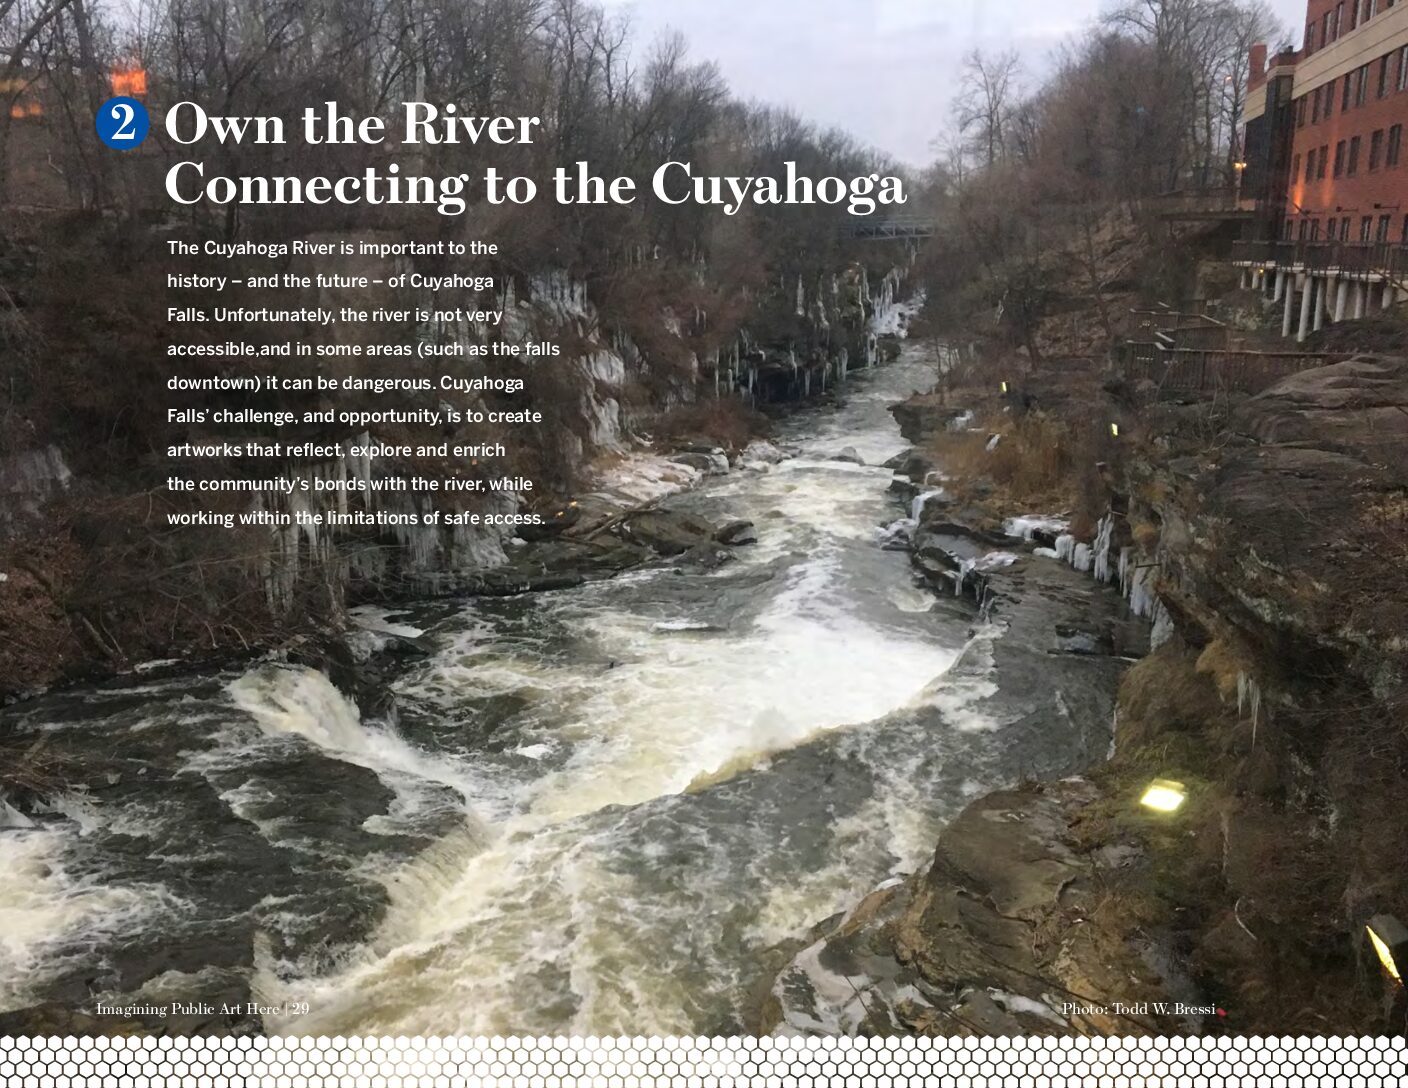 River in the City: Our Town Grant in Cuyahoga Falls